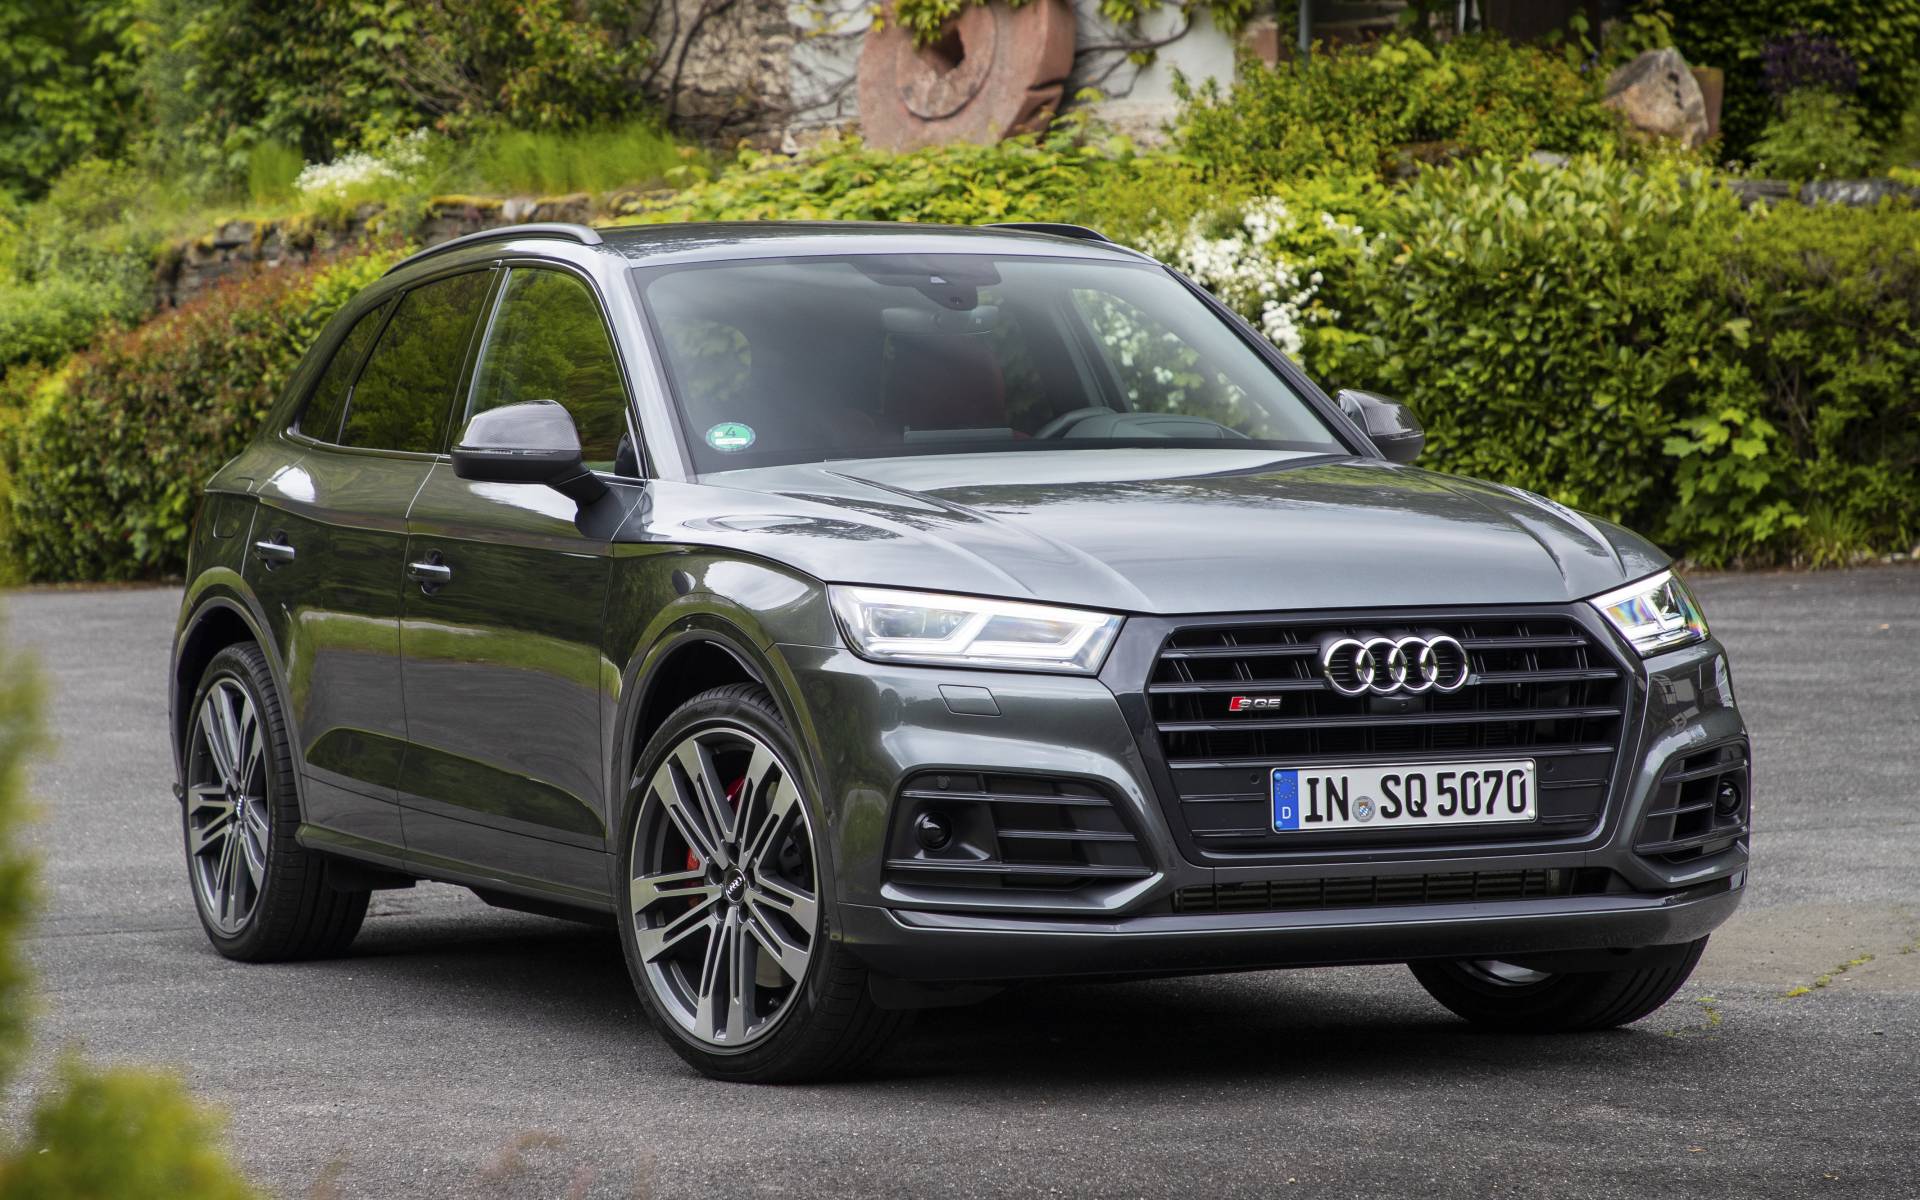 2020 Audi Q5 - News, reviews, picture galleries and videos - The Car Guide